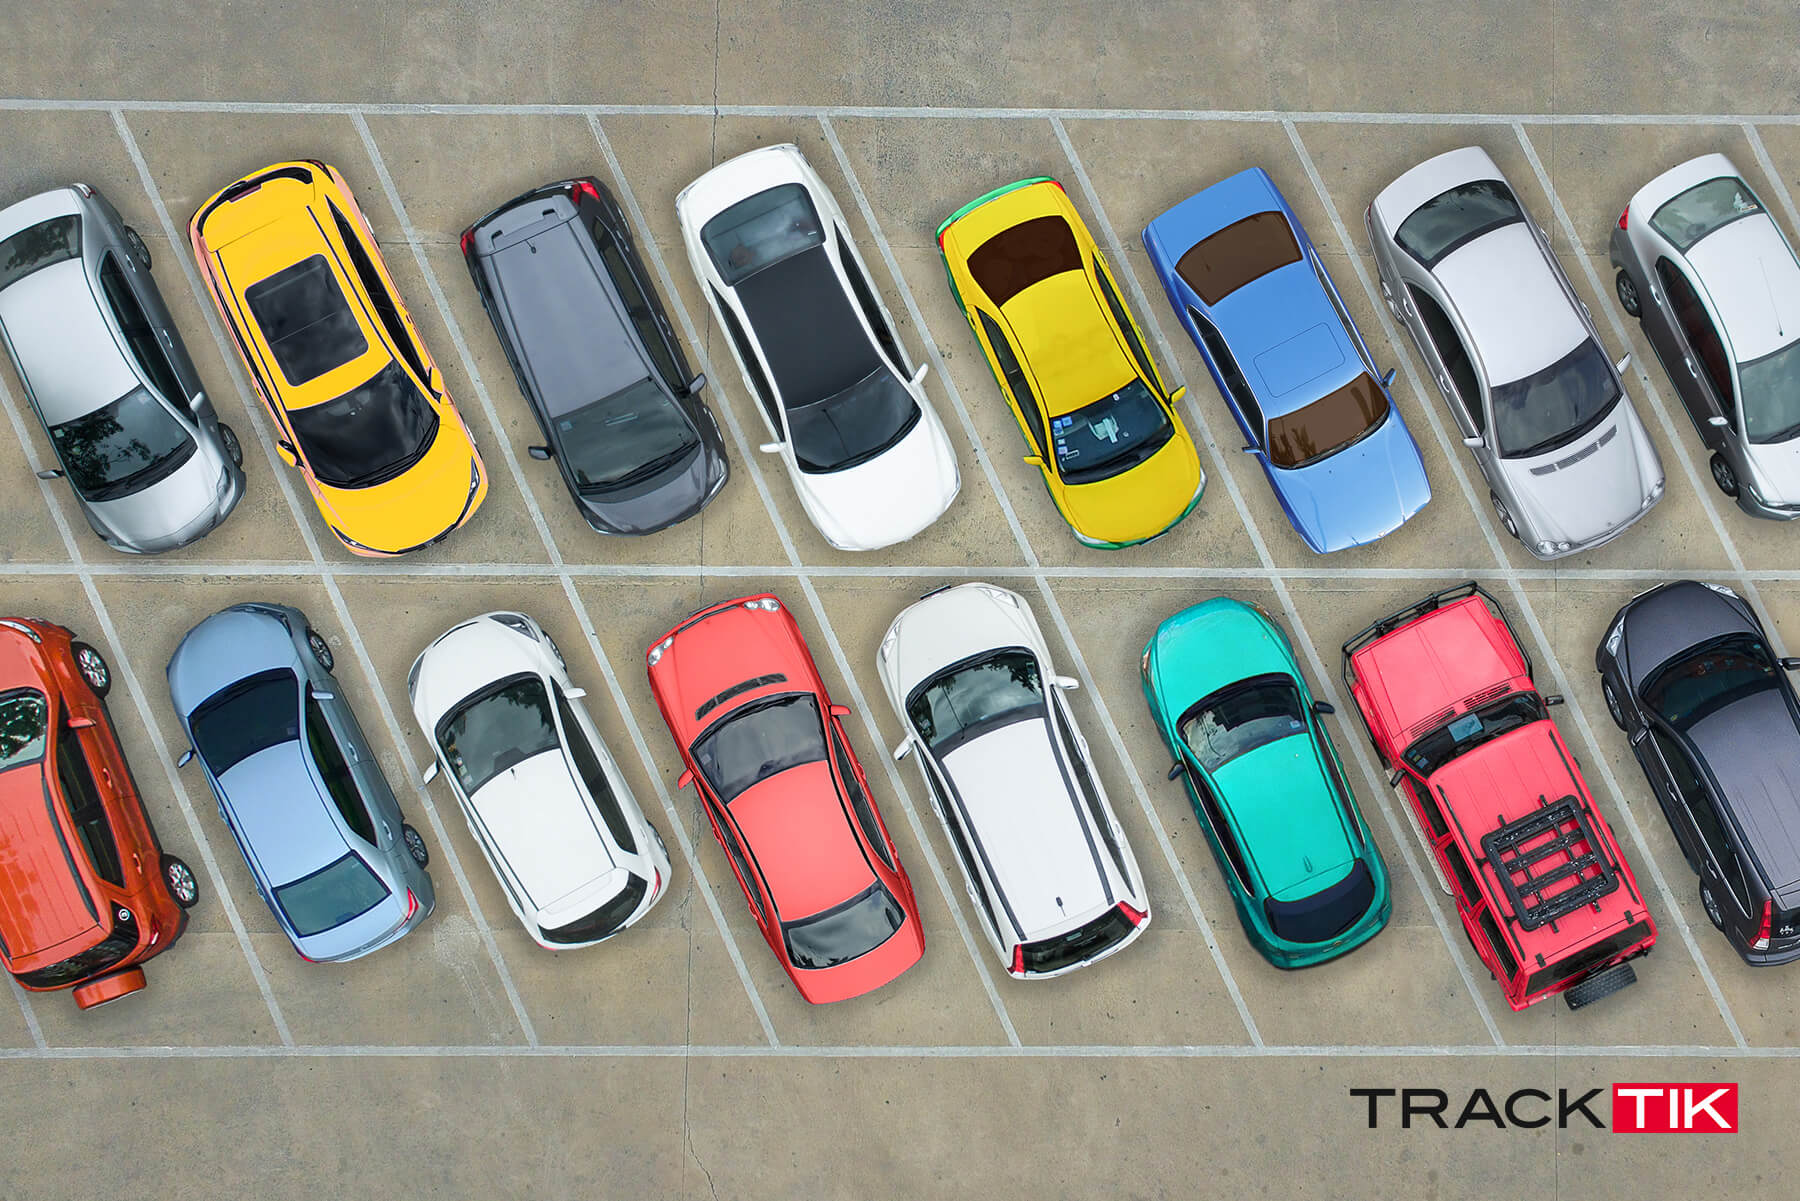 Augmenting Your Security Operations & Revenue with Smart Parking Management